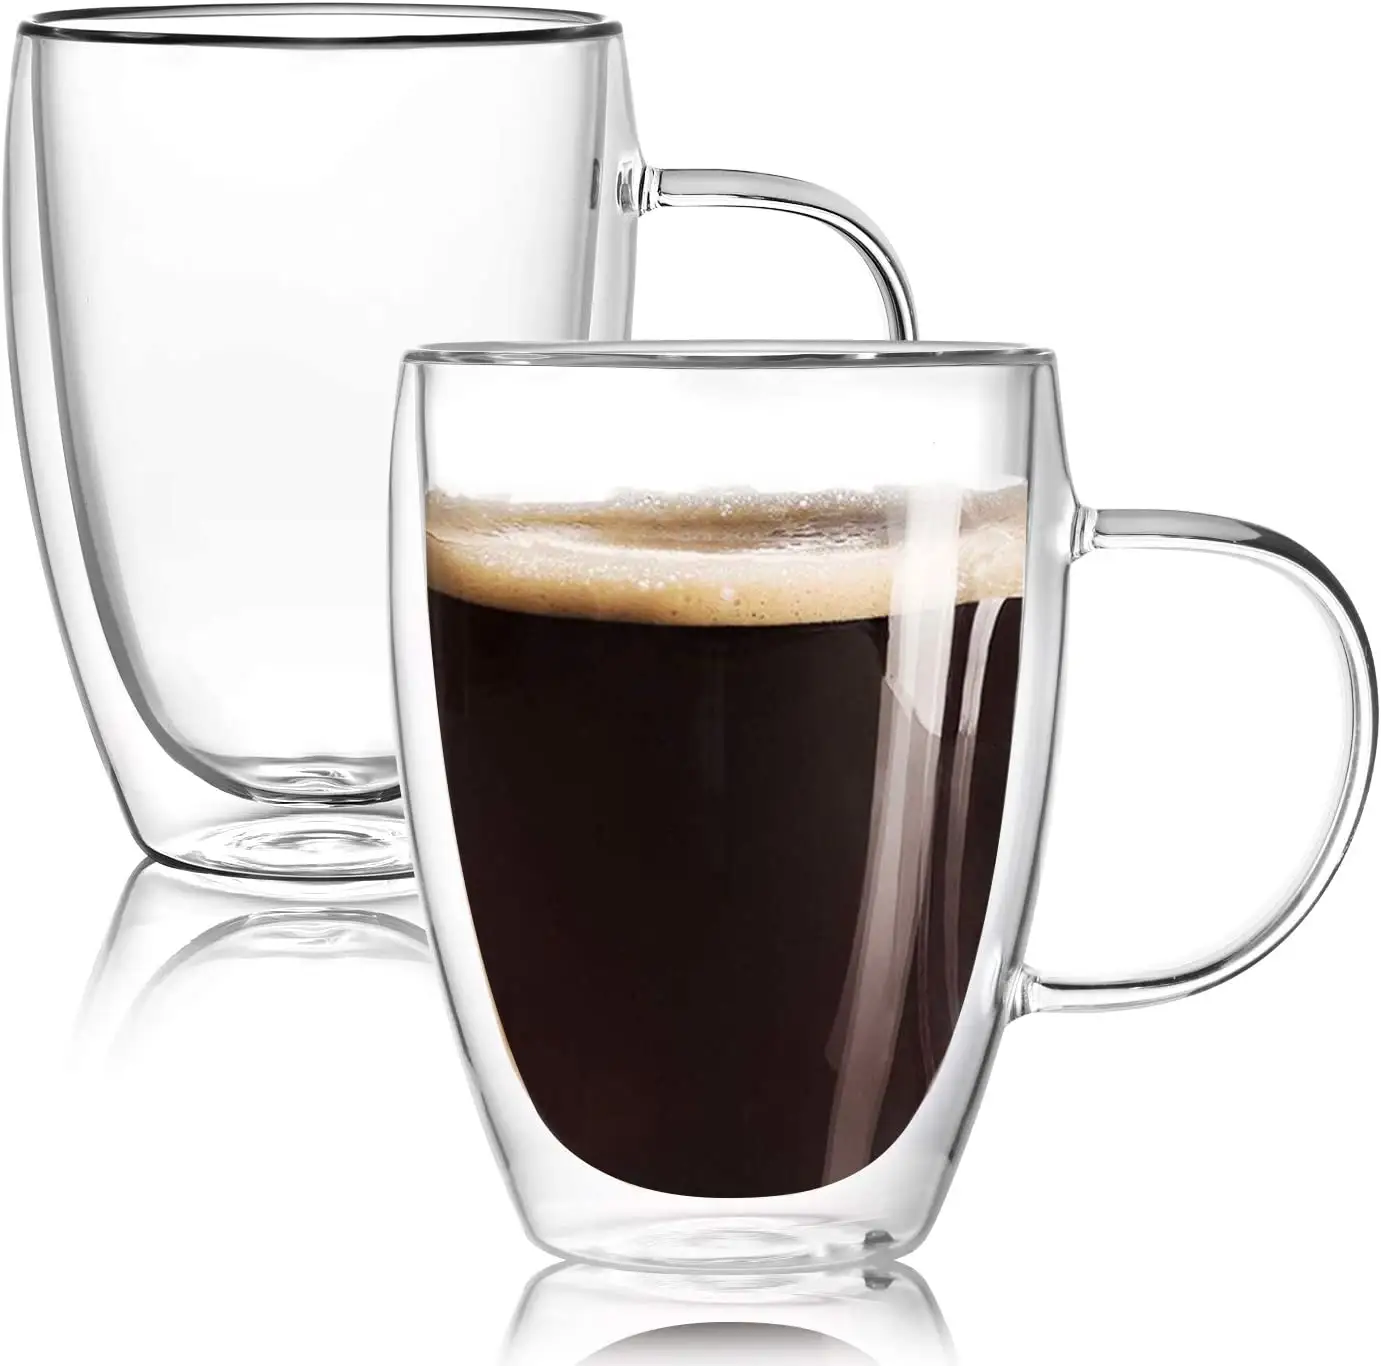 China factory clear transparent glass mug with handle espresso coffee single wall glass water cup for coffee and tea